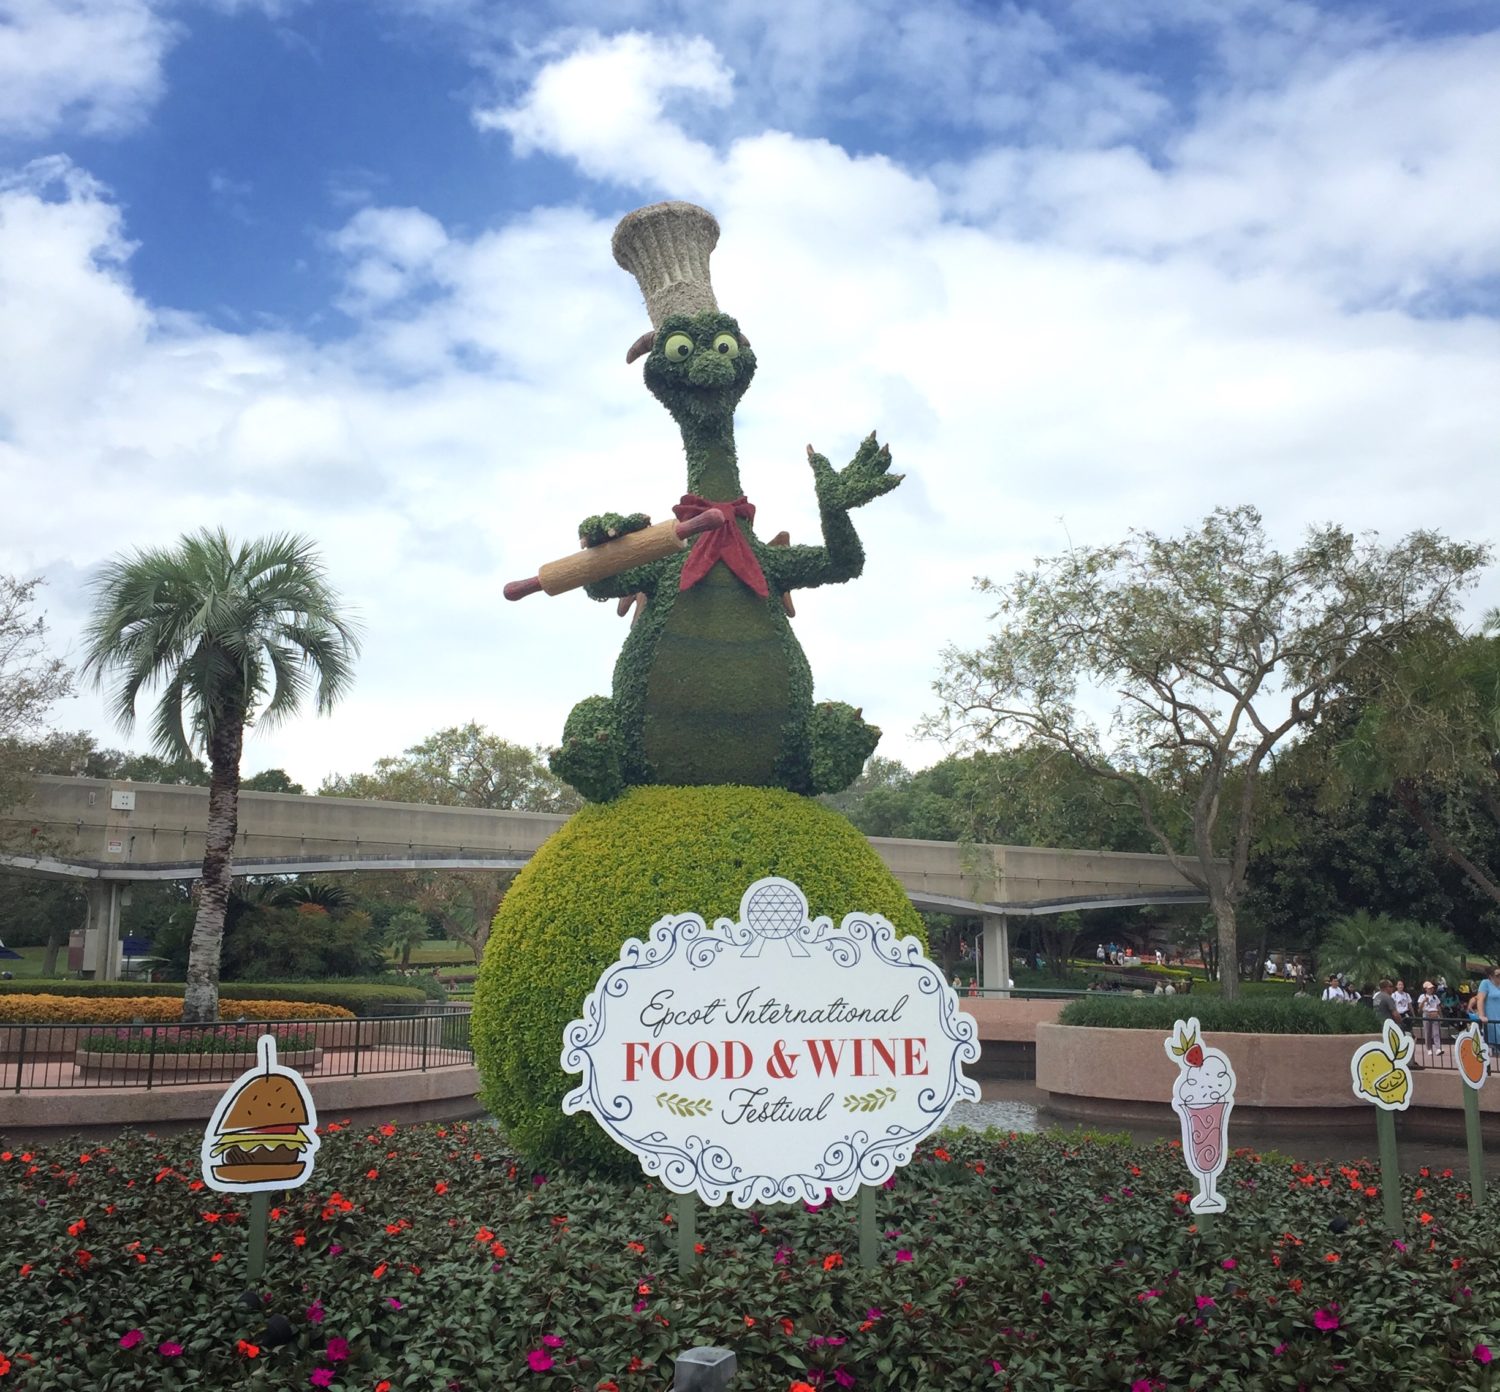 Review of Epcot International Food and Wine Festival at Disney World